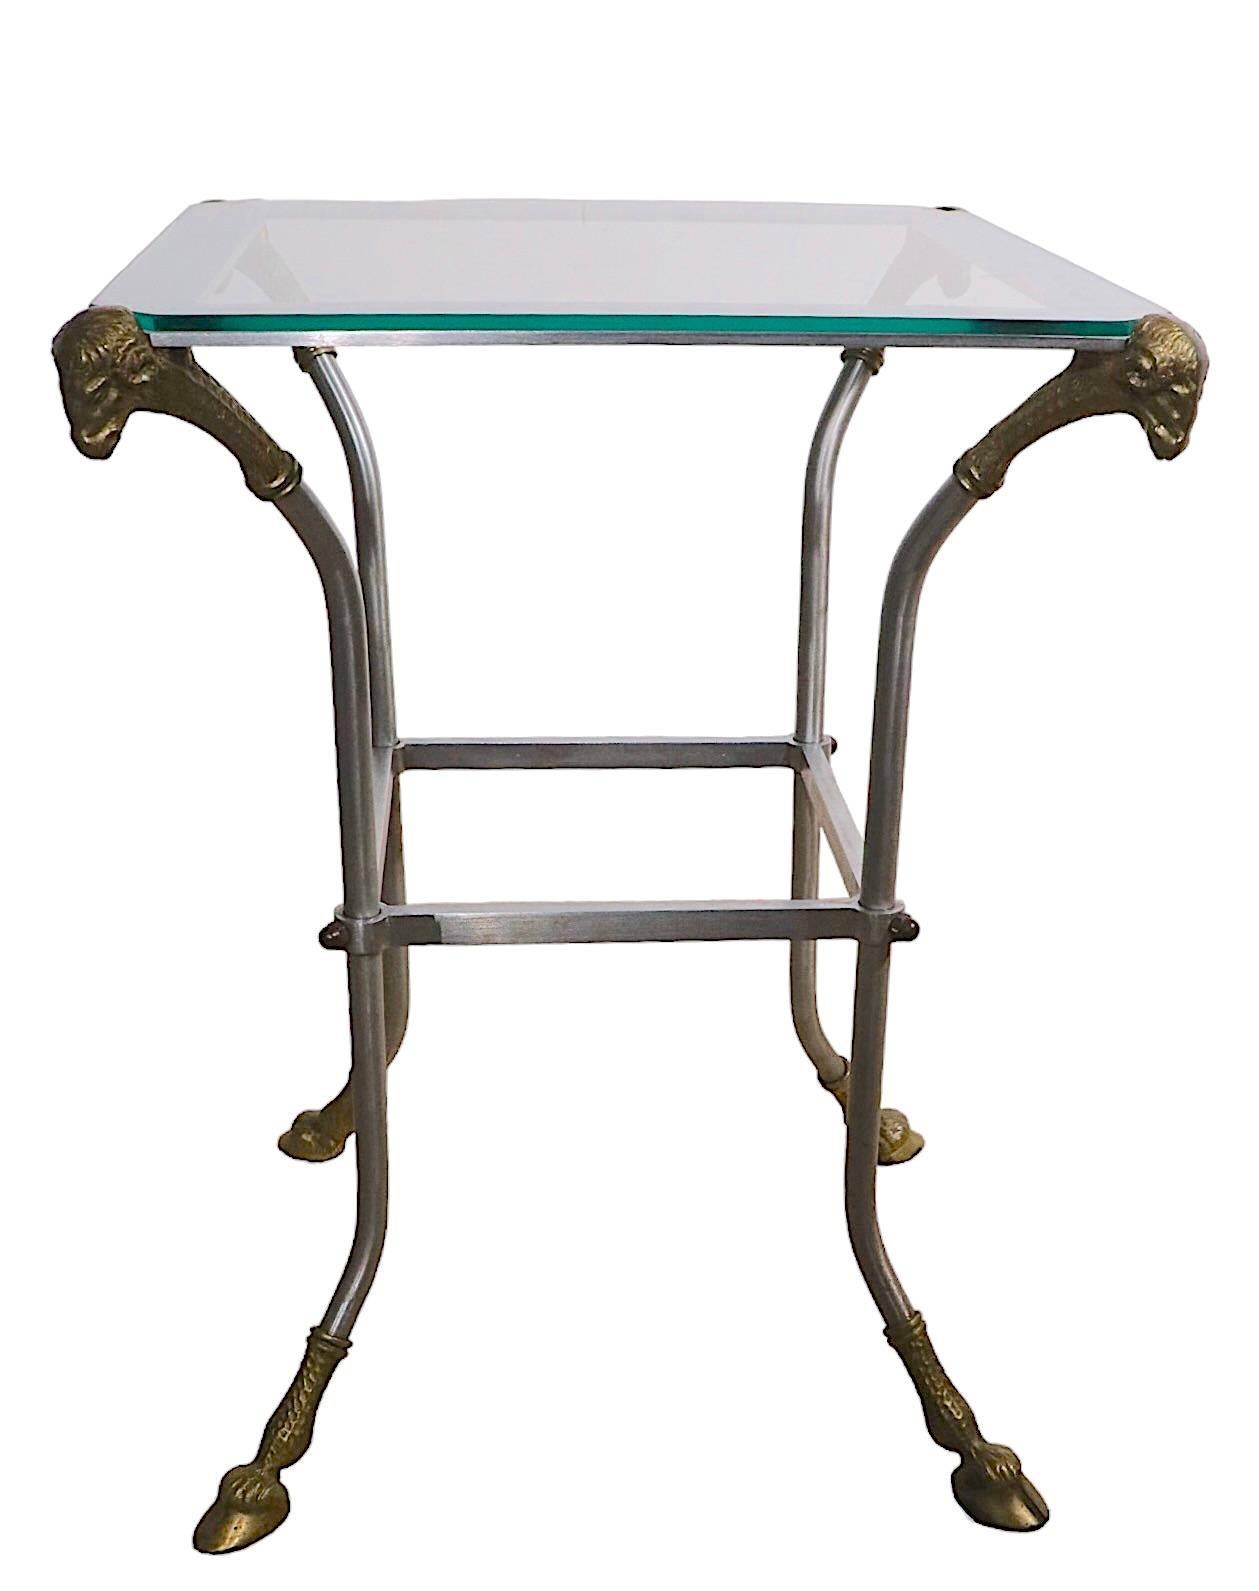 Steel Brass and Glass Neo Classic Table Att. to Maison Jansen For Sale 8